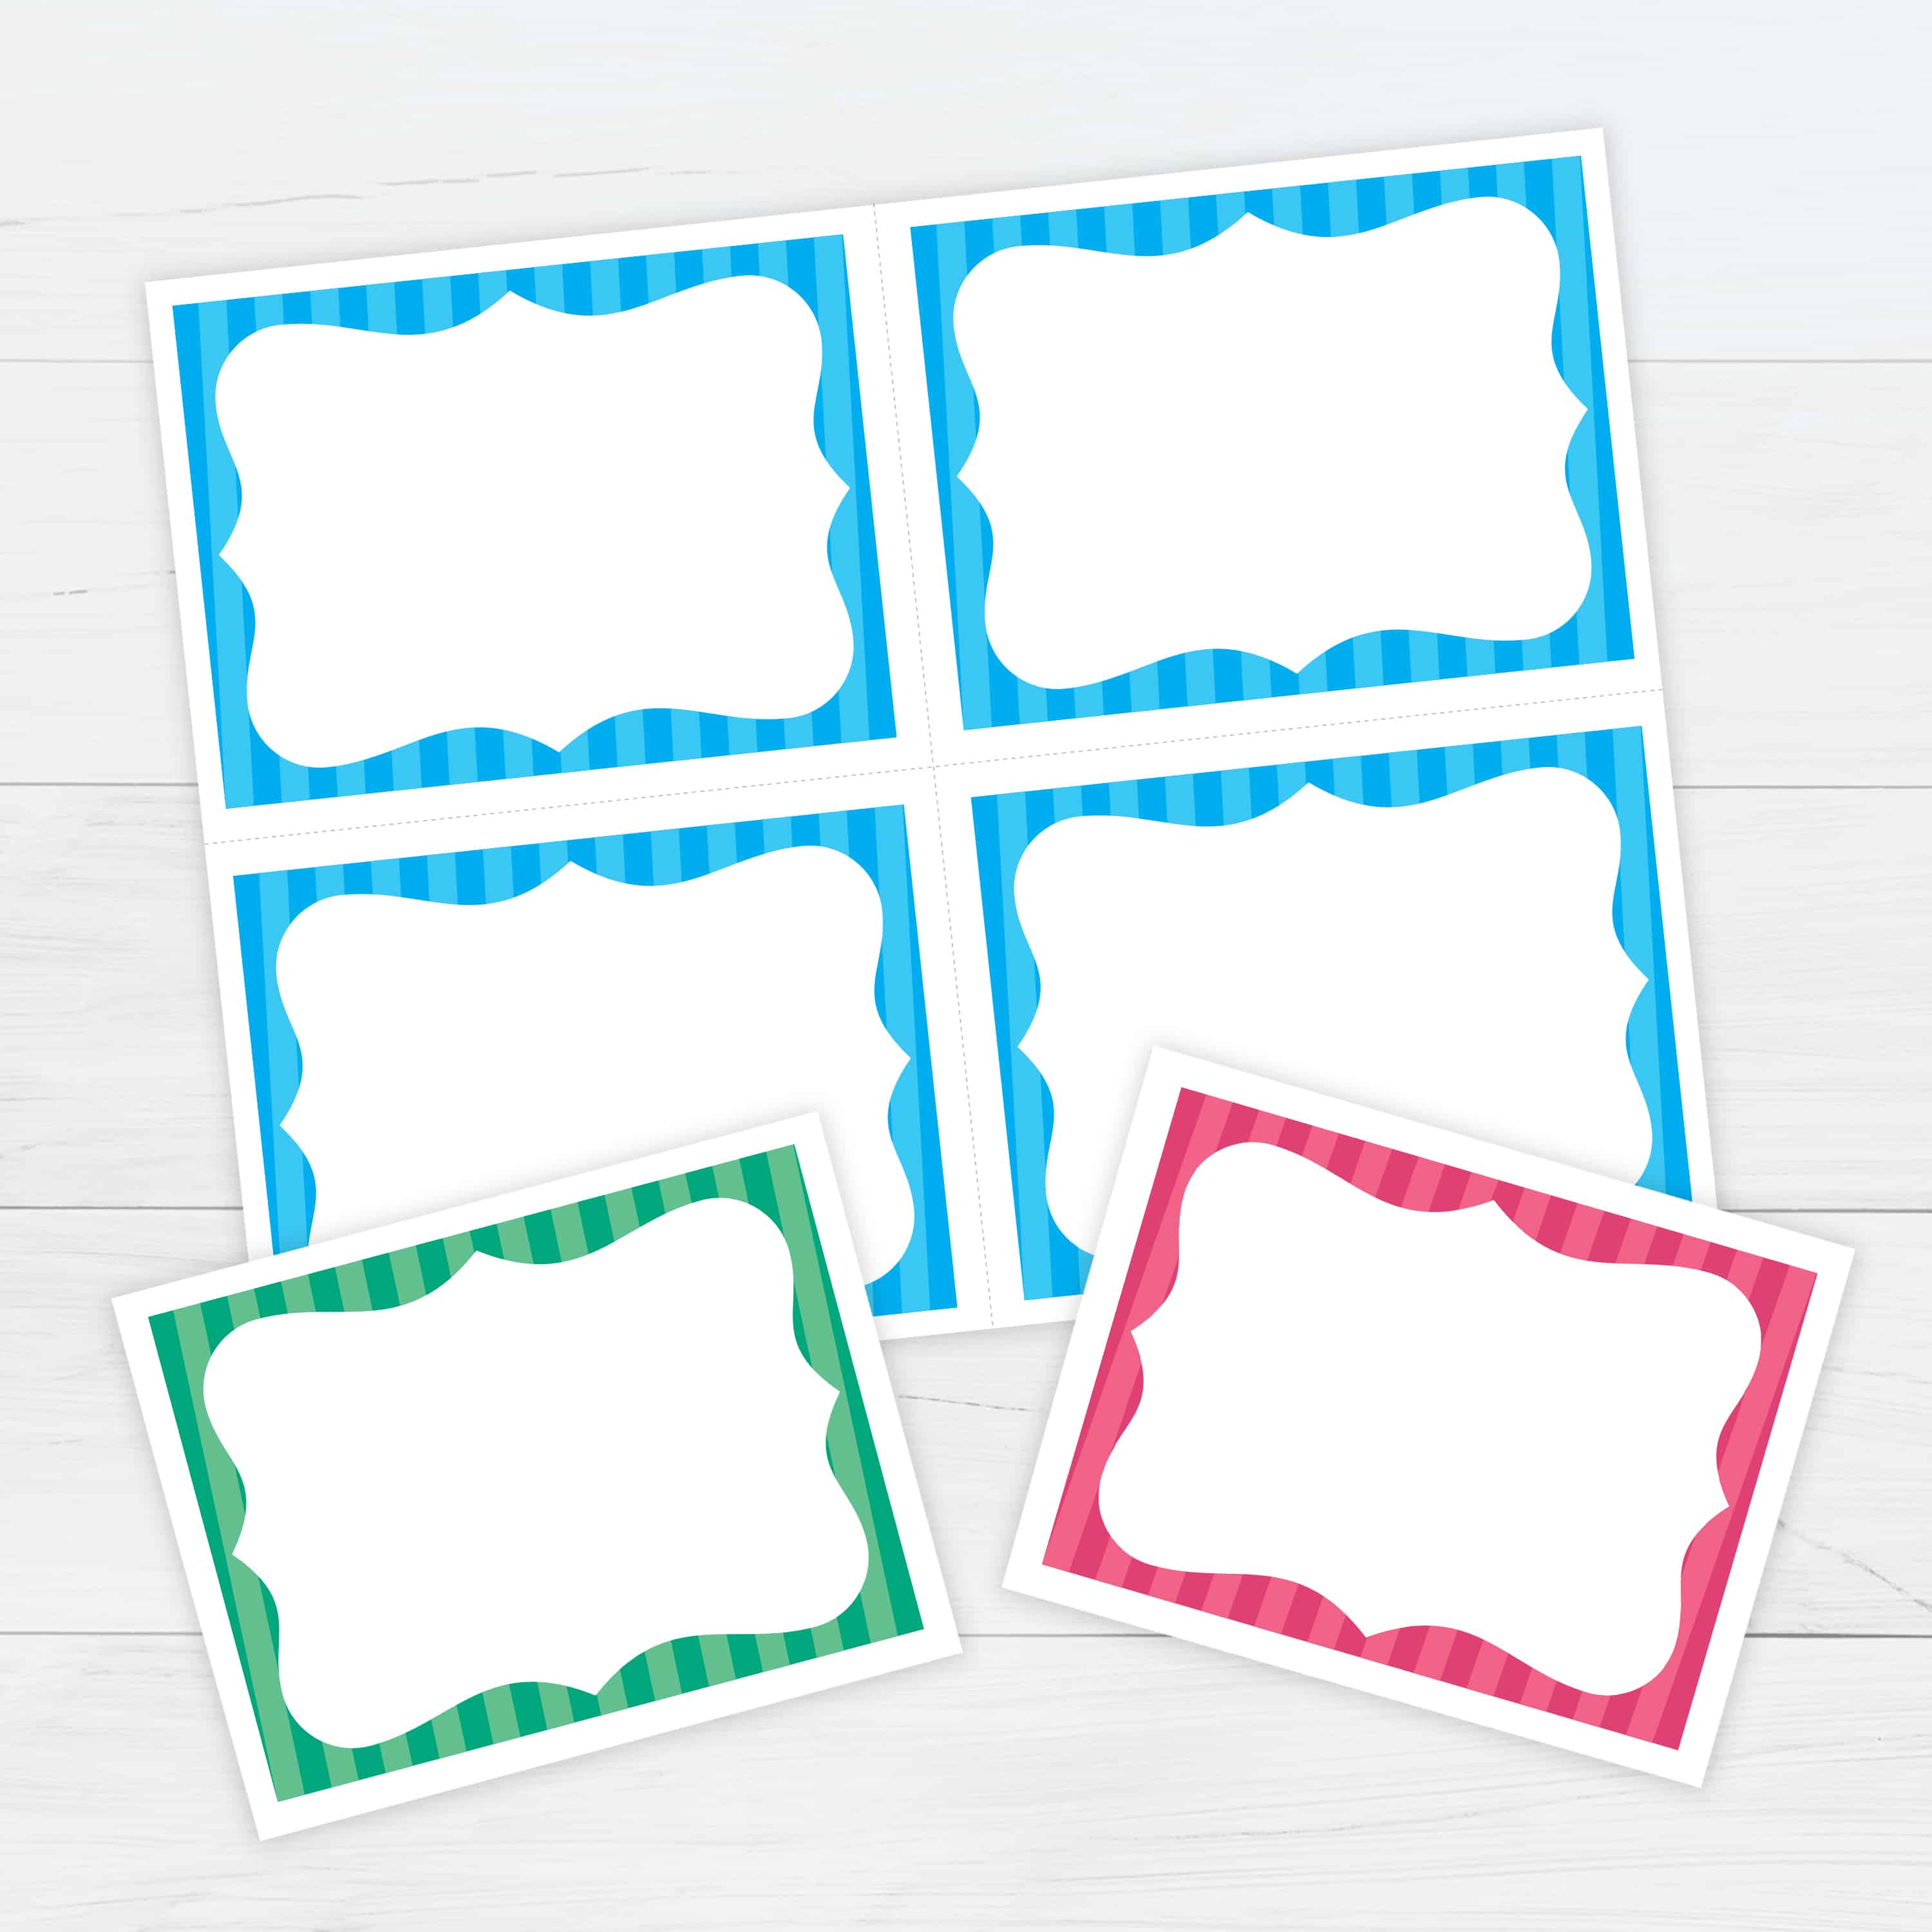 PrintWorks - Templates for Index Cards, Flash Cards, Postcards and Within Cue Card Template Word